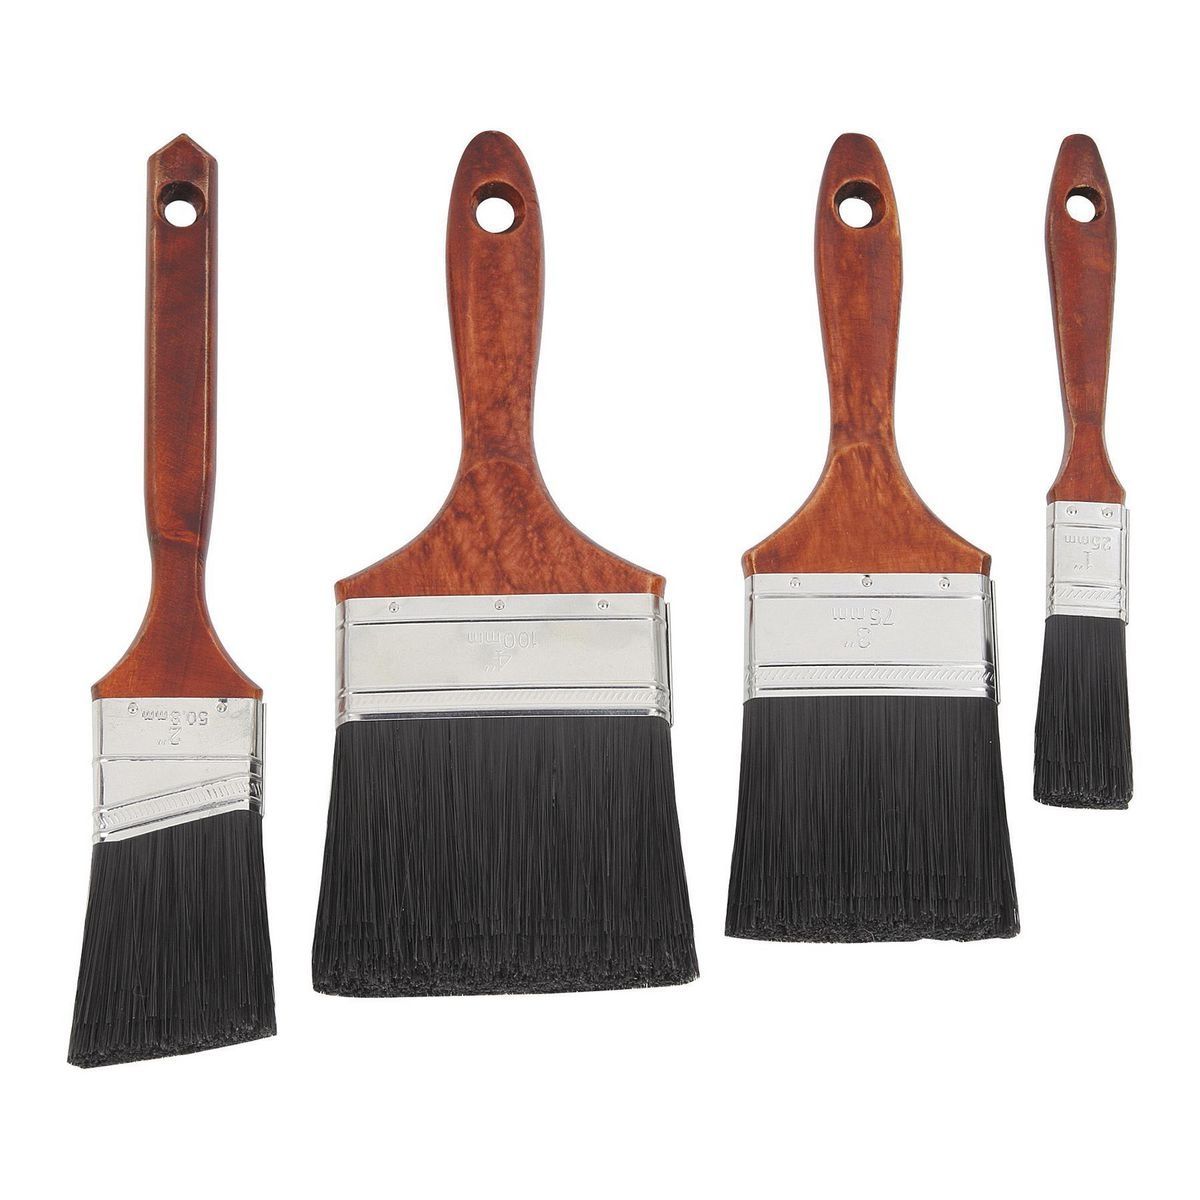 FINCH & MCLAY Paint Brush Set with Wood Handles, 4 Piece - ECO Quality